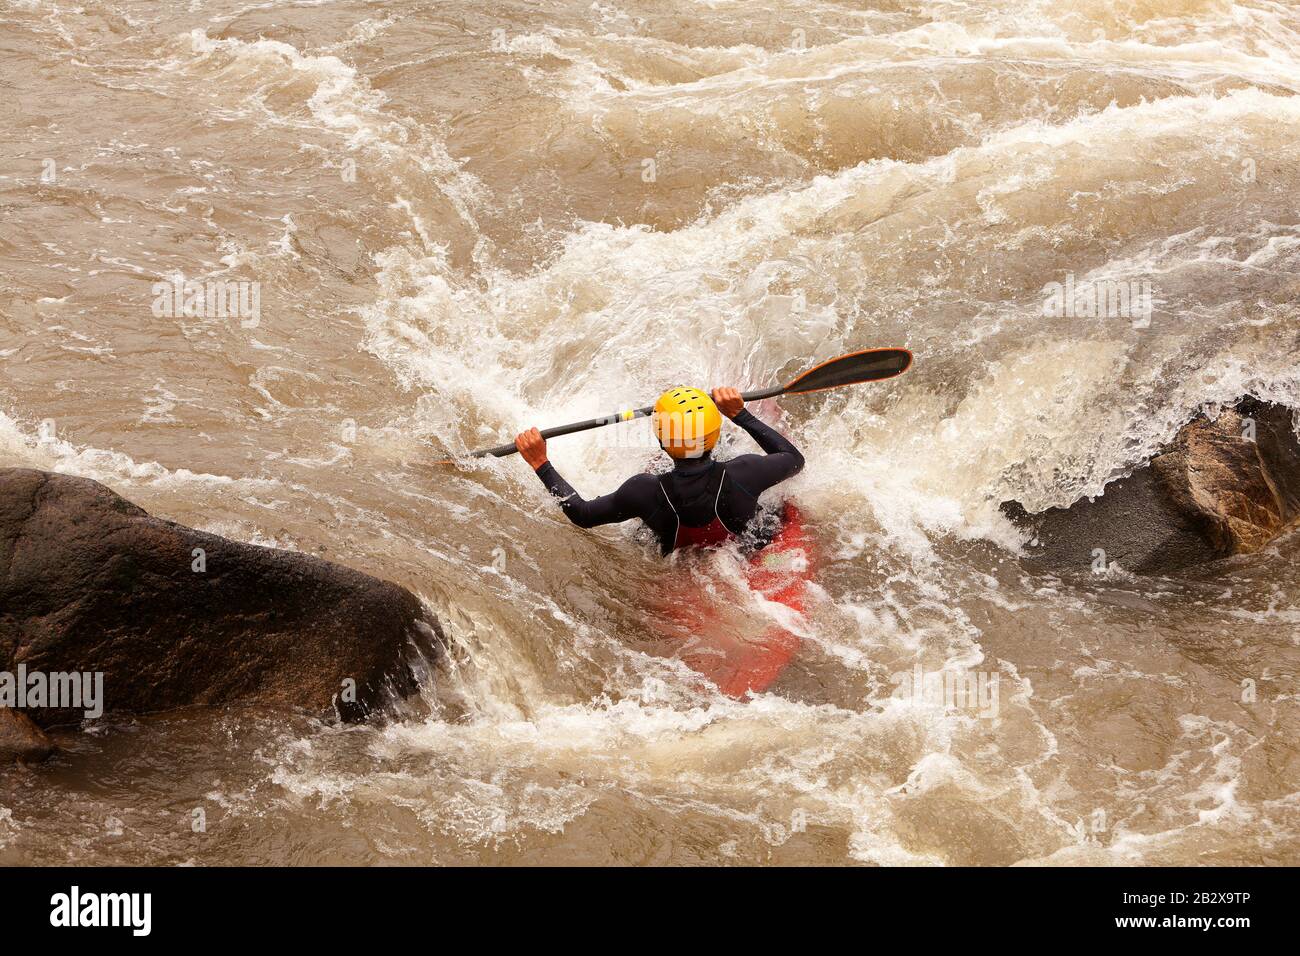 An Active Kayaker On The Rough Water Stock Photo